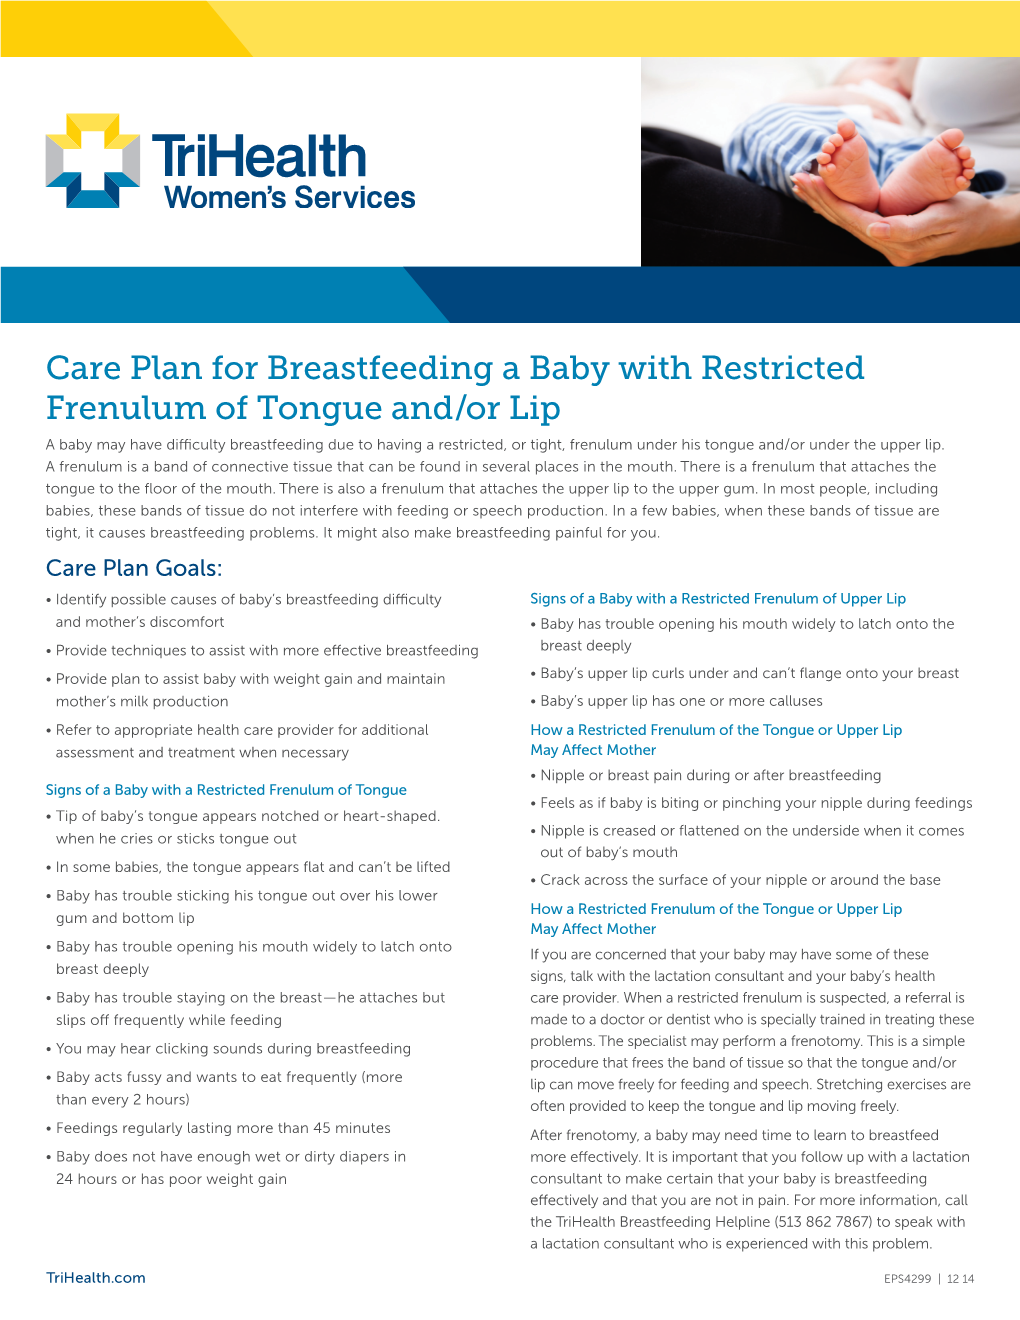 Care Plan for Breastfeeding a Baby with Restricted Frenulum of Tongue And/Or